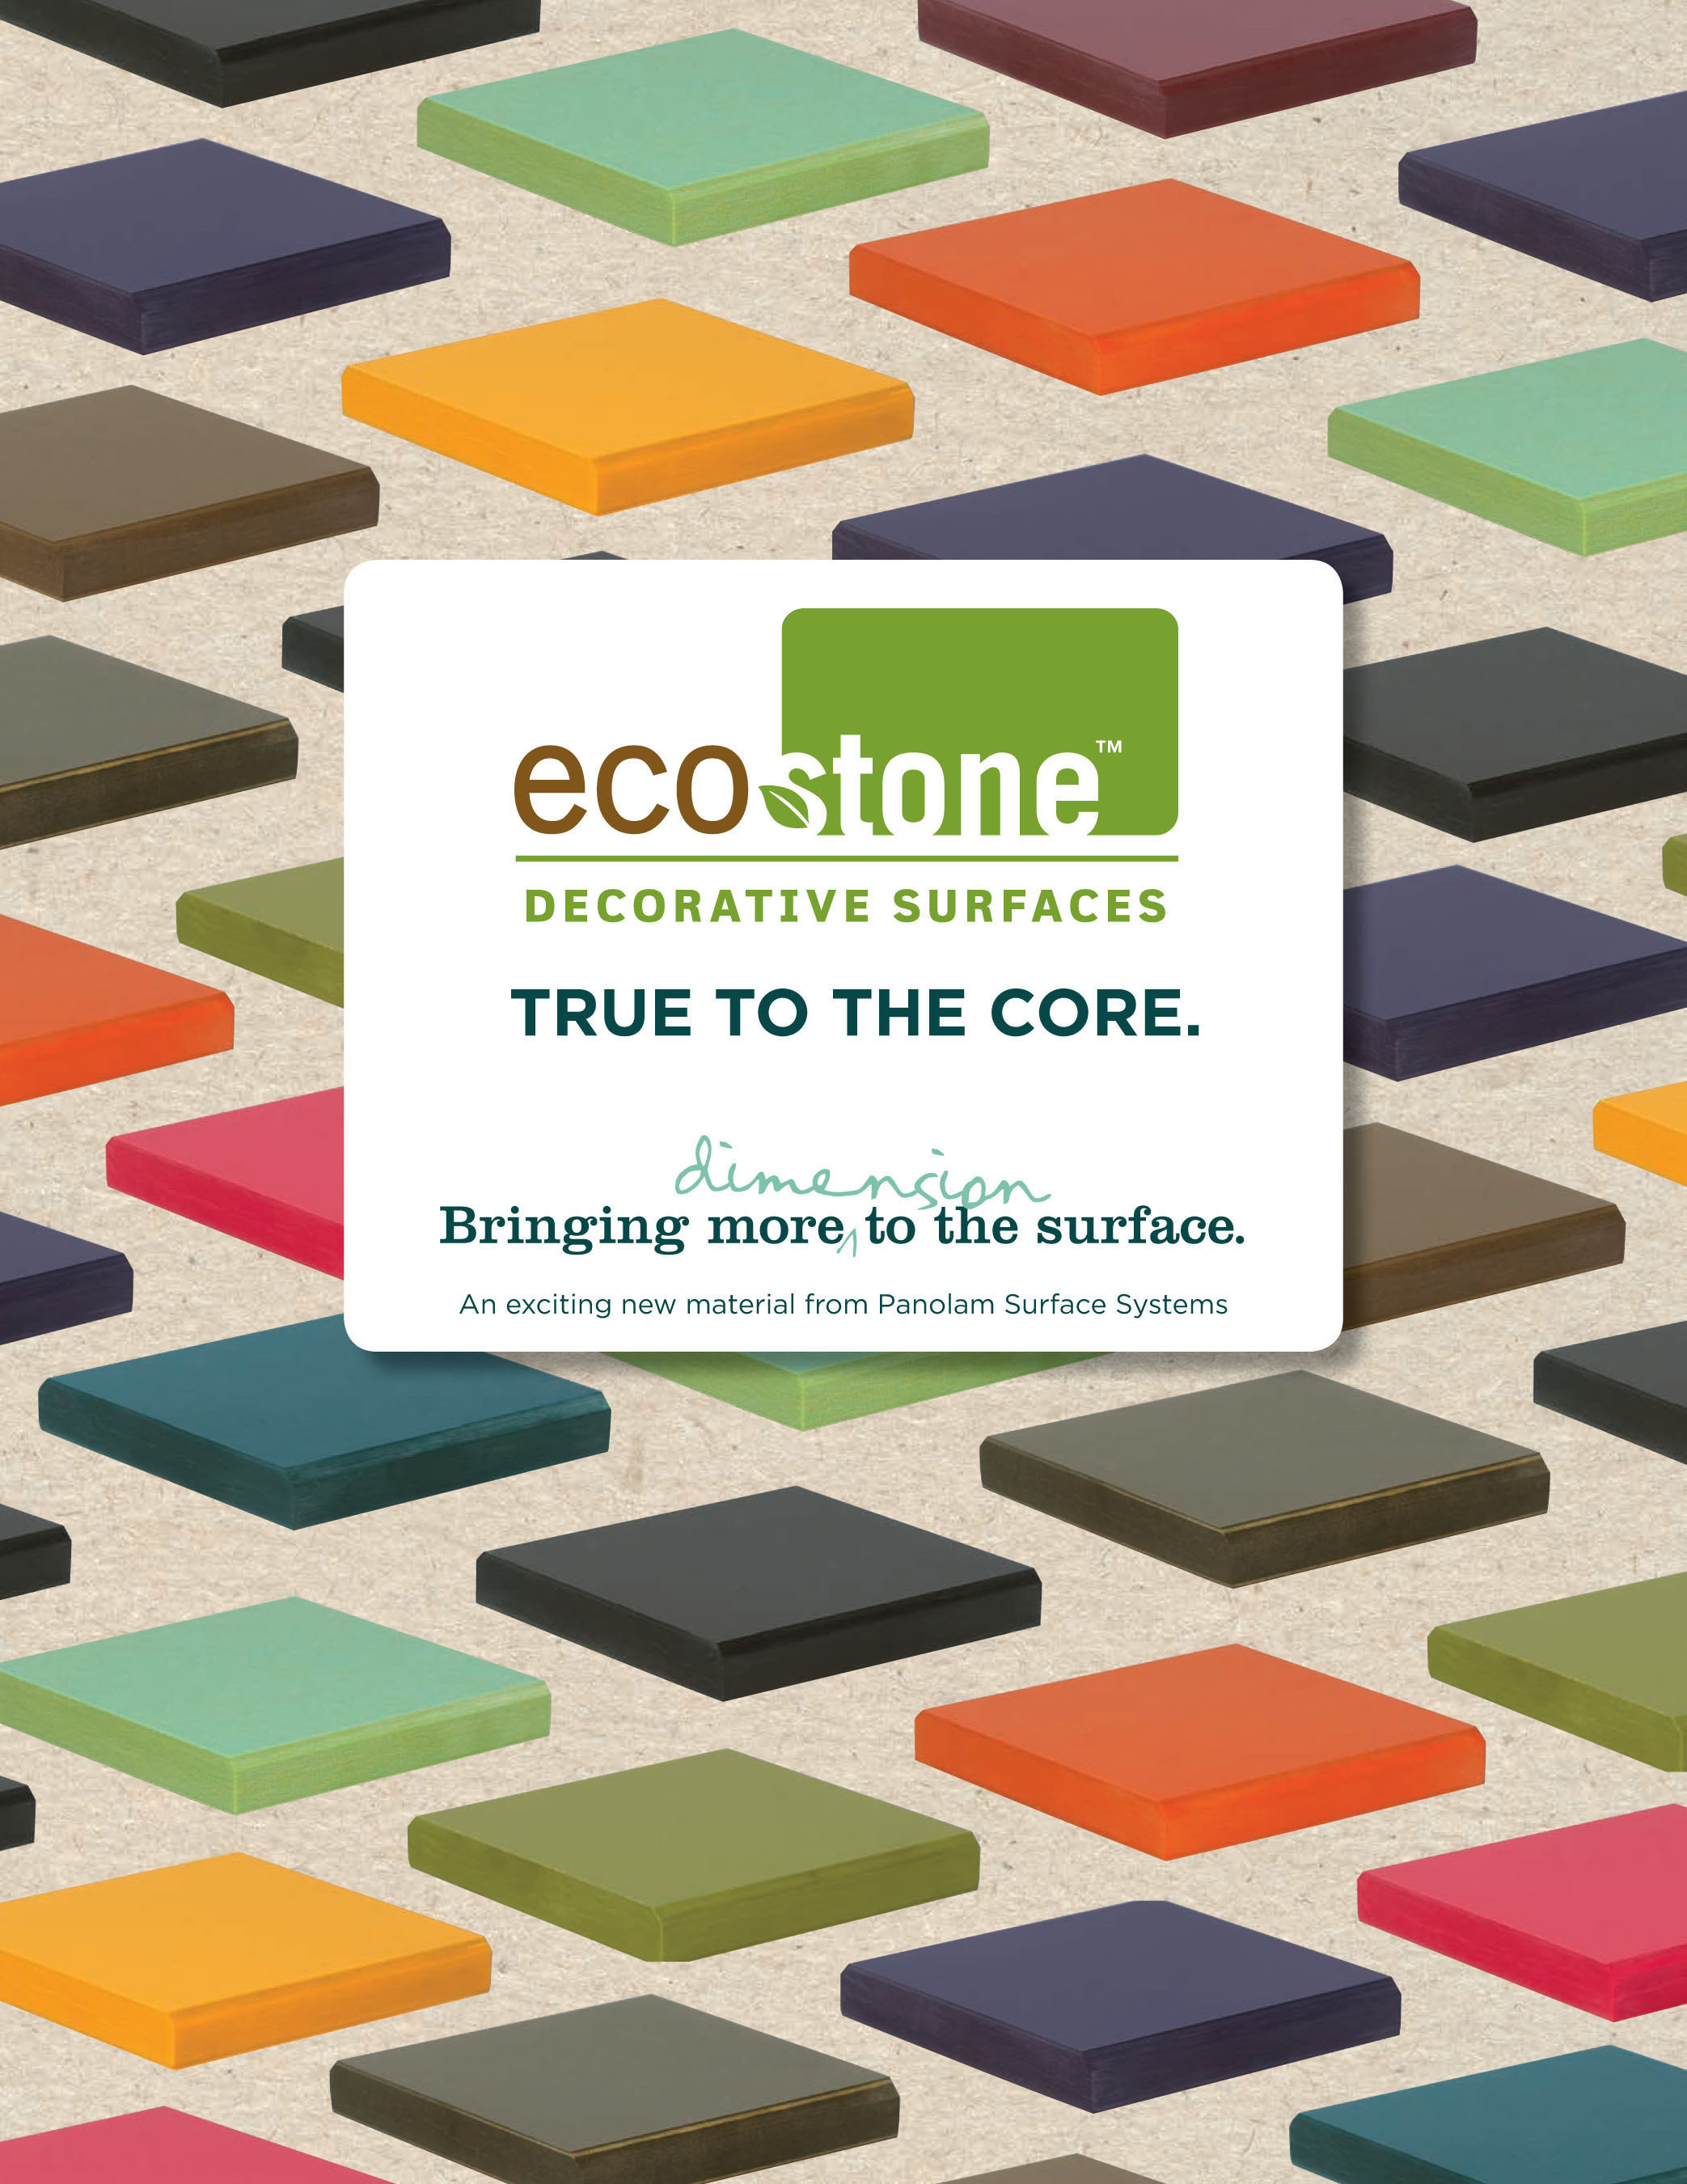 Panolam(TM) Surface Systems announces the introduction of EcoStone(TM) Decorative Surfaces - a revolutionary, durable, heat and stain resistant surface for commercial and residential use that's made of 100% recycled core paper. It's an ideal surface for kitchen and bathroom counters, tabletops, as well as laboratory, office and commercial surfaces. (PRNewsFoto/Panolam Surface Systems) (PRNewsFoto/PANOLAM SURFACE SYSTEMS)